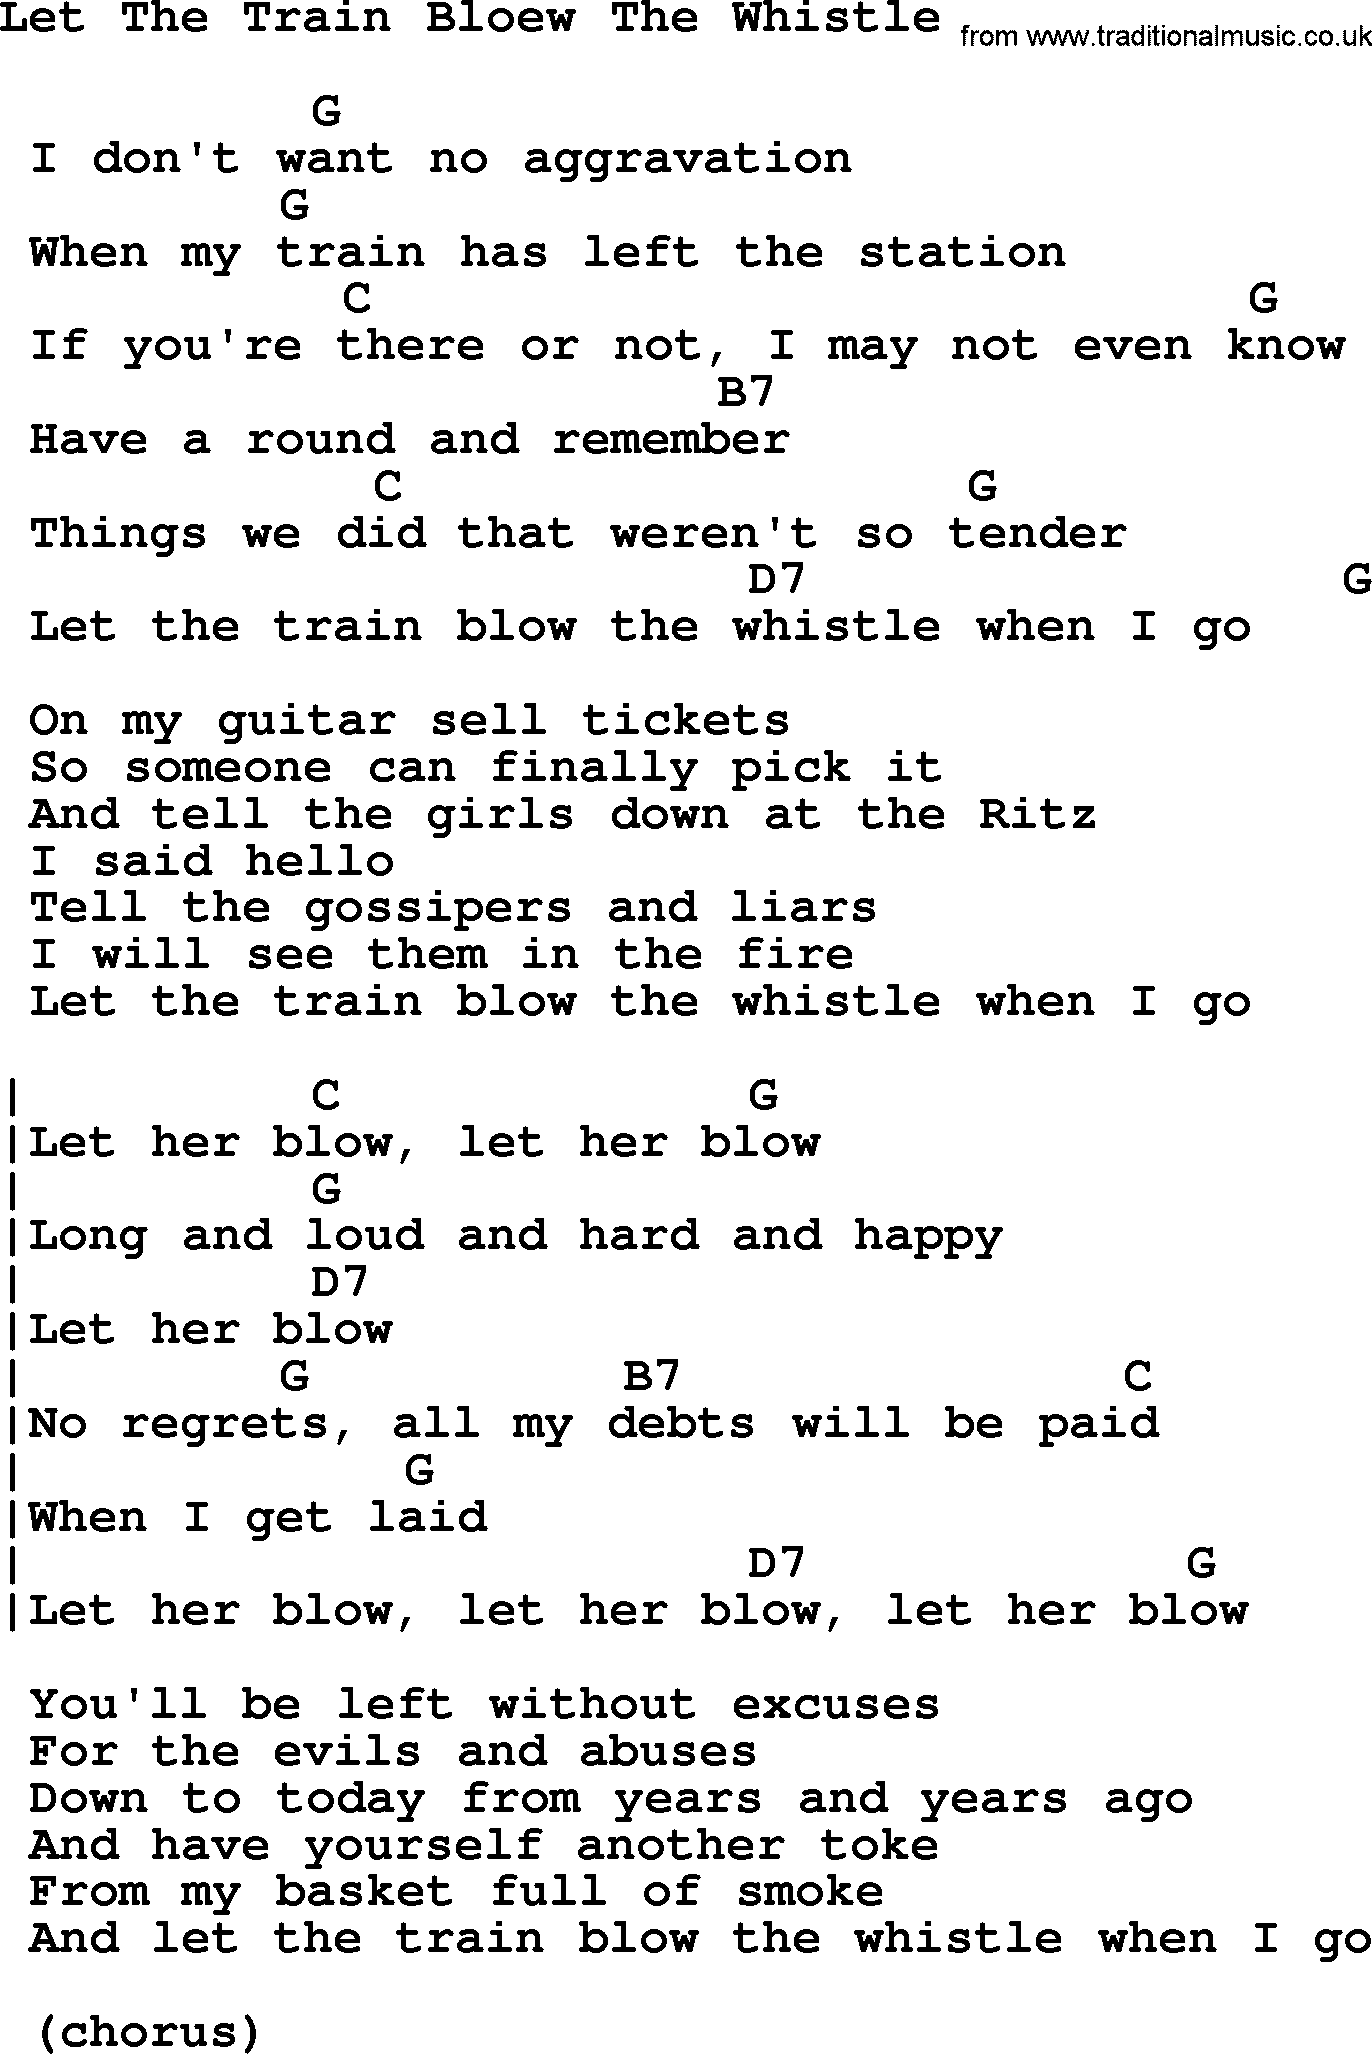 Johnny Cash song Let The Train Bloew The Whistle, lyrics and chords